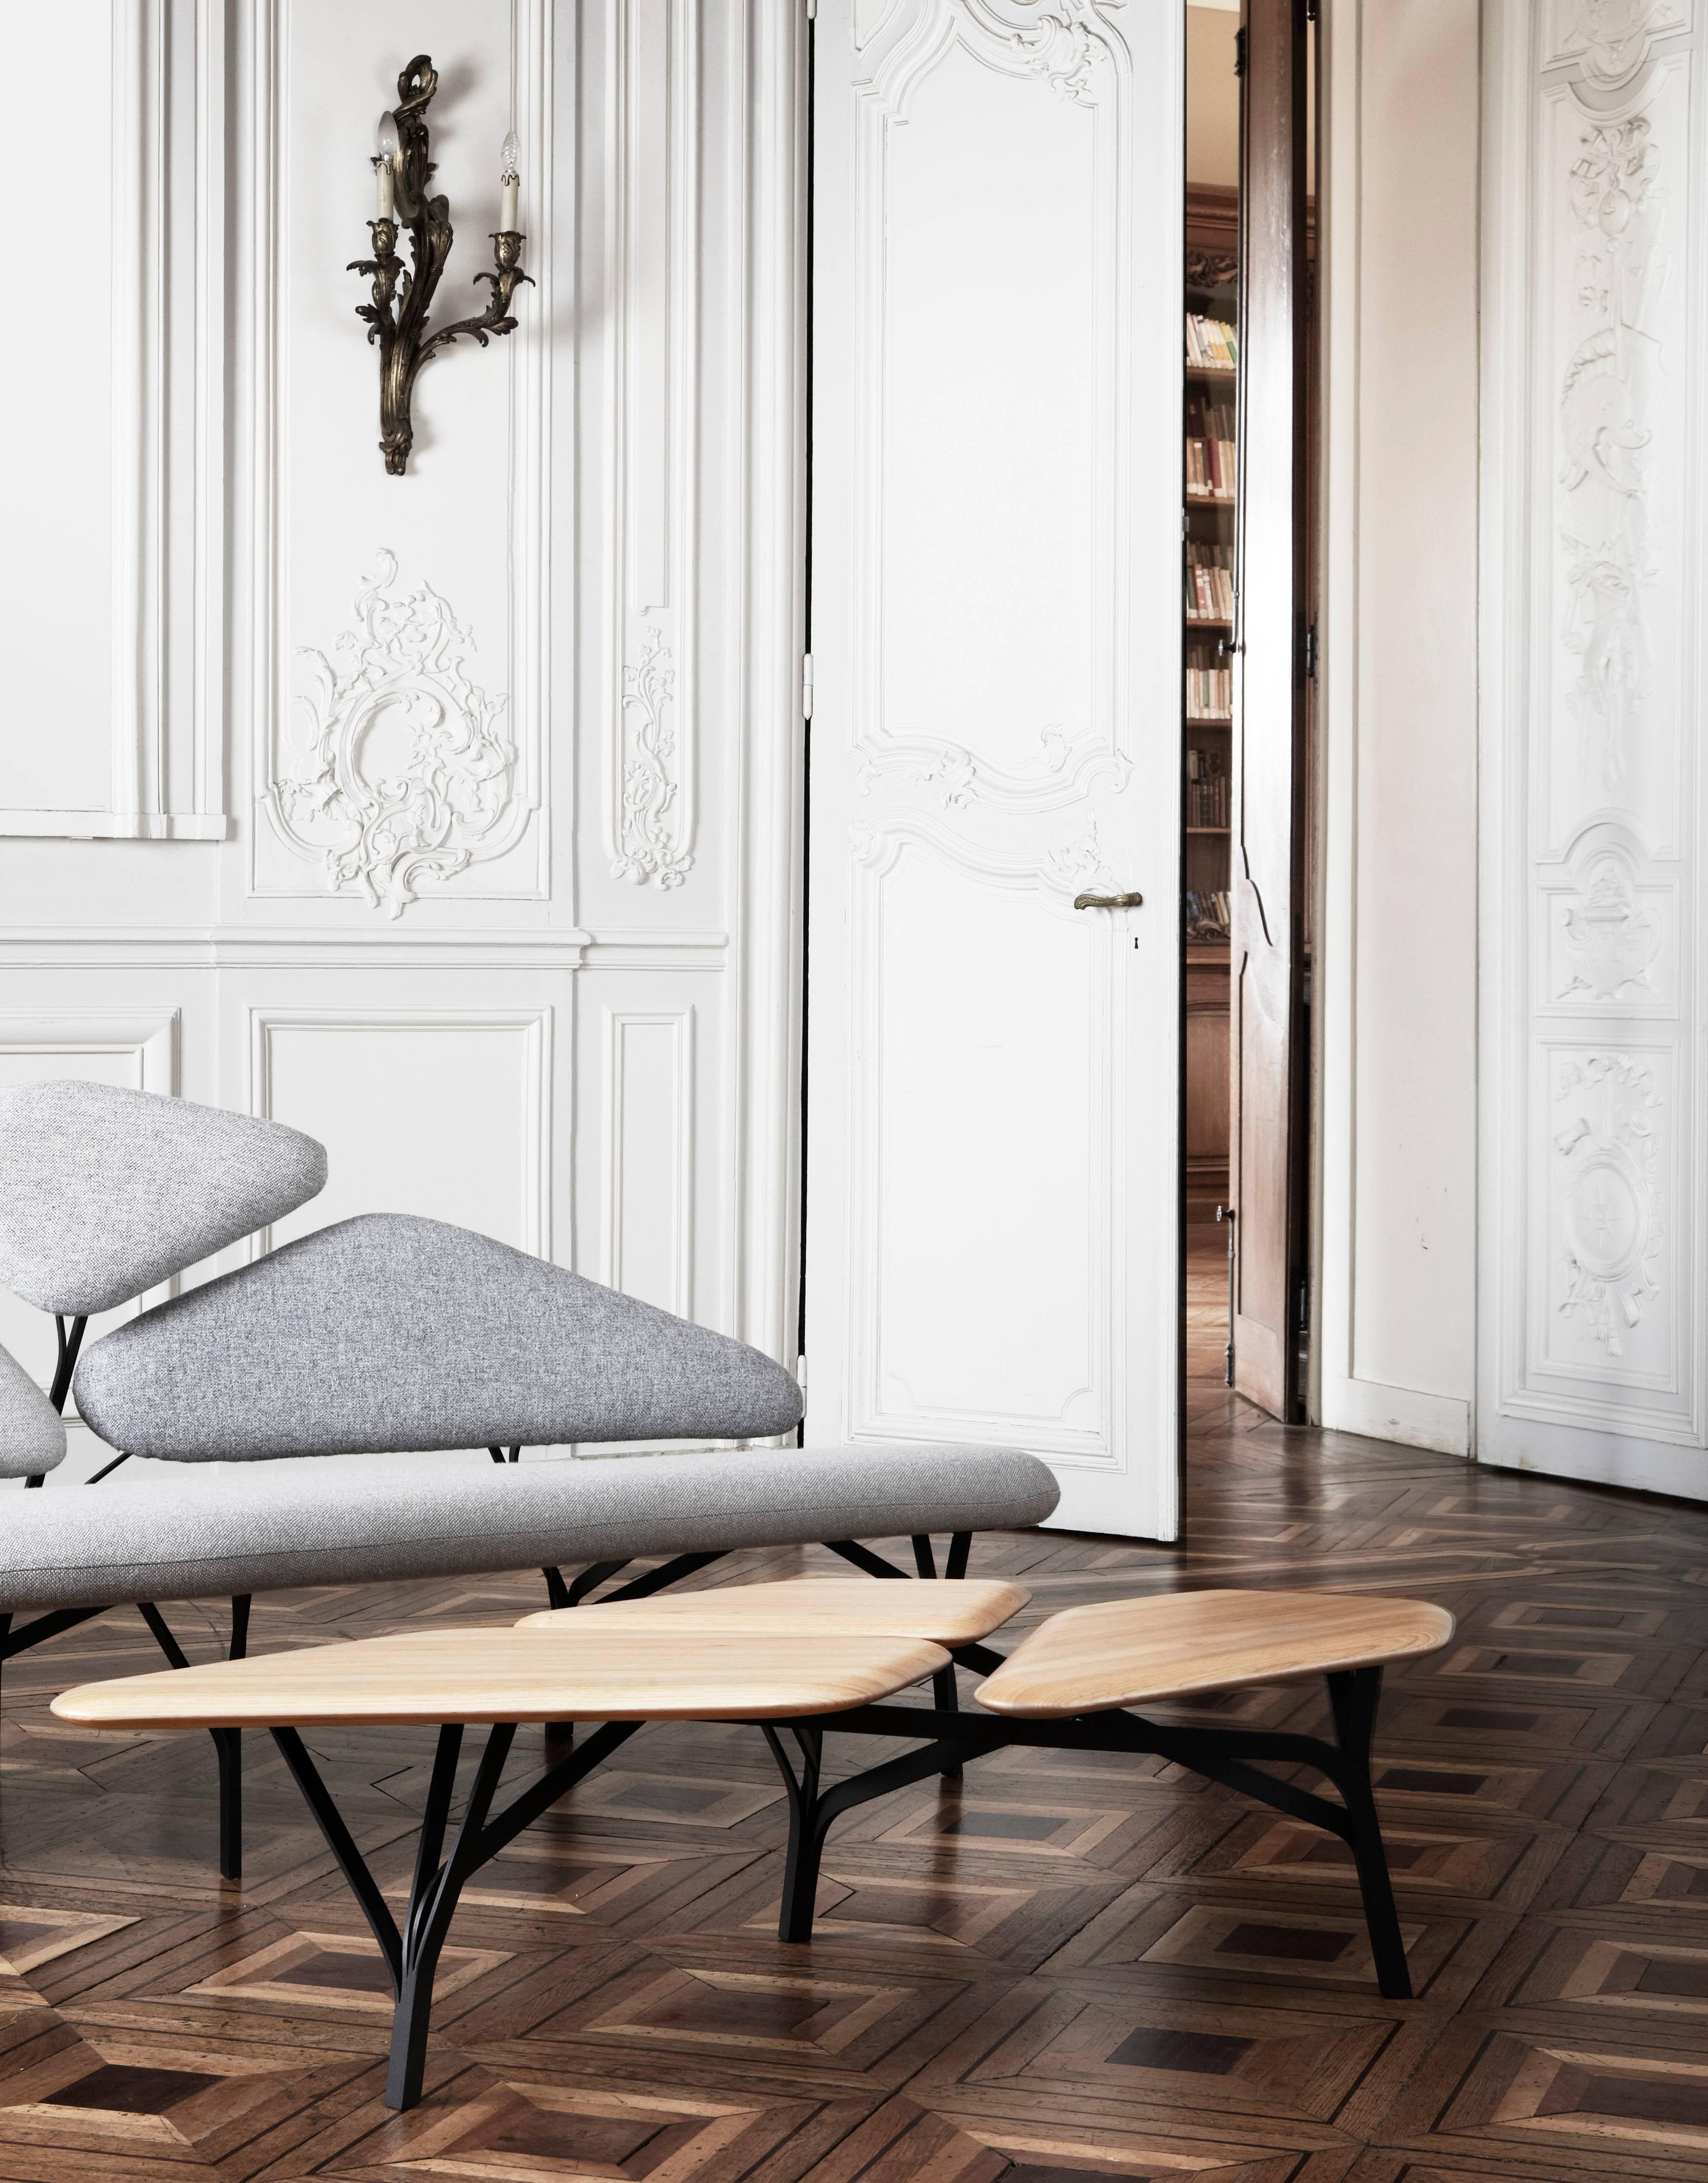 Borghese coffee table by Noé Duchaufour-Lawrance

Dimensions: 35 x 139 x 64 cm
Solid oak tabletop, steel structure
Mat Black stained wood

Biography
Not wishing to simply produce or be rational about a product. Noé Duchaufour-Lawrance prefers that